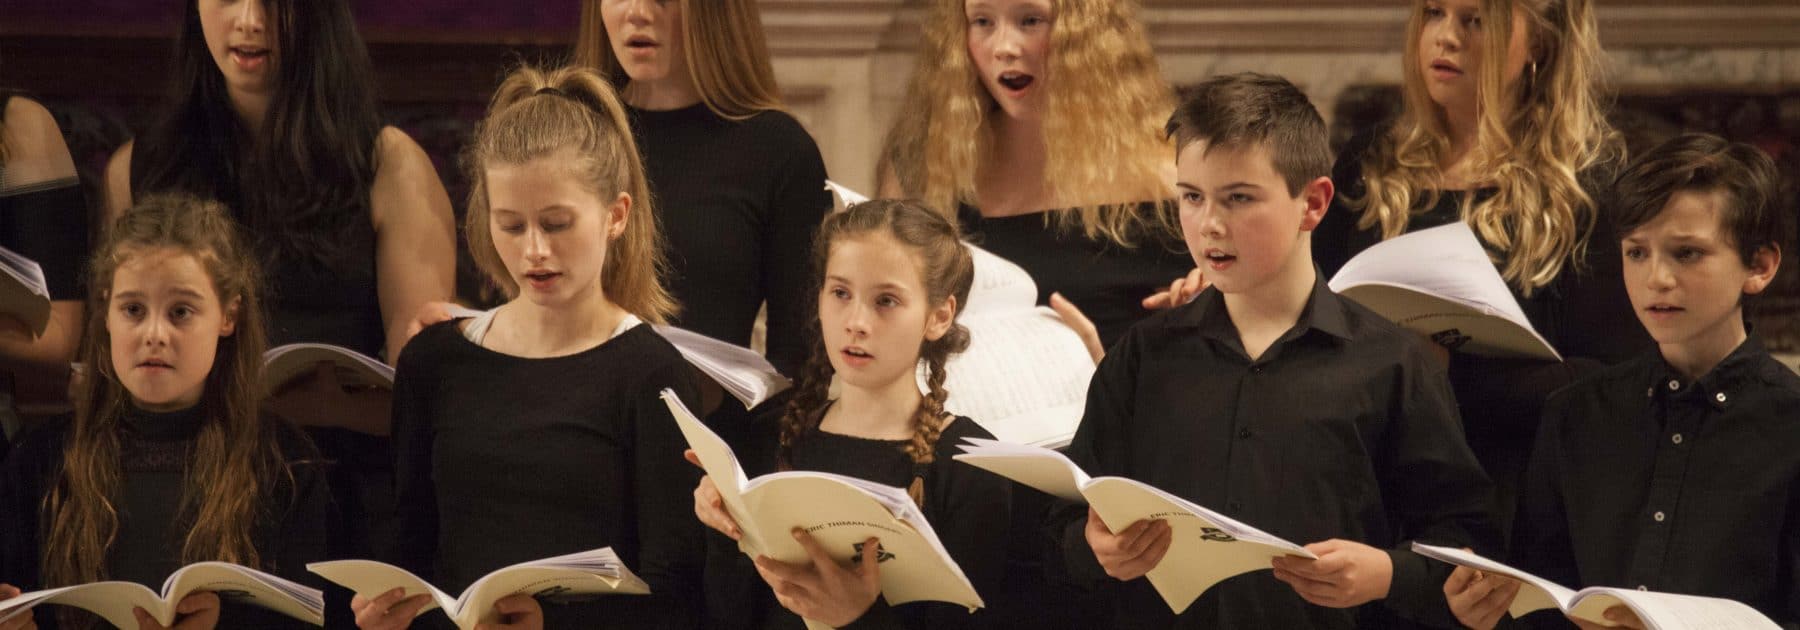 Auditions for Chapel Choir JETS & ETS Now Open